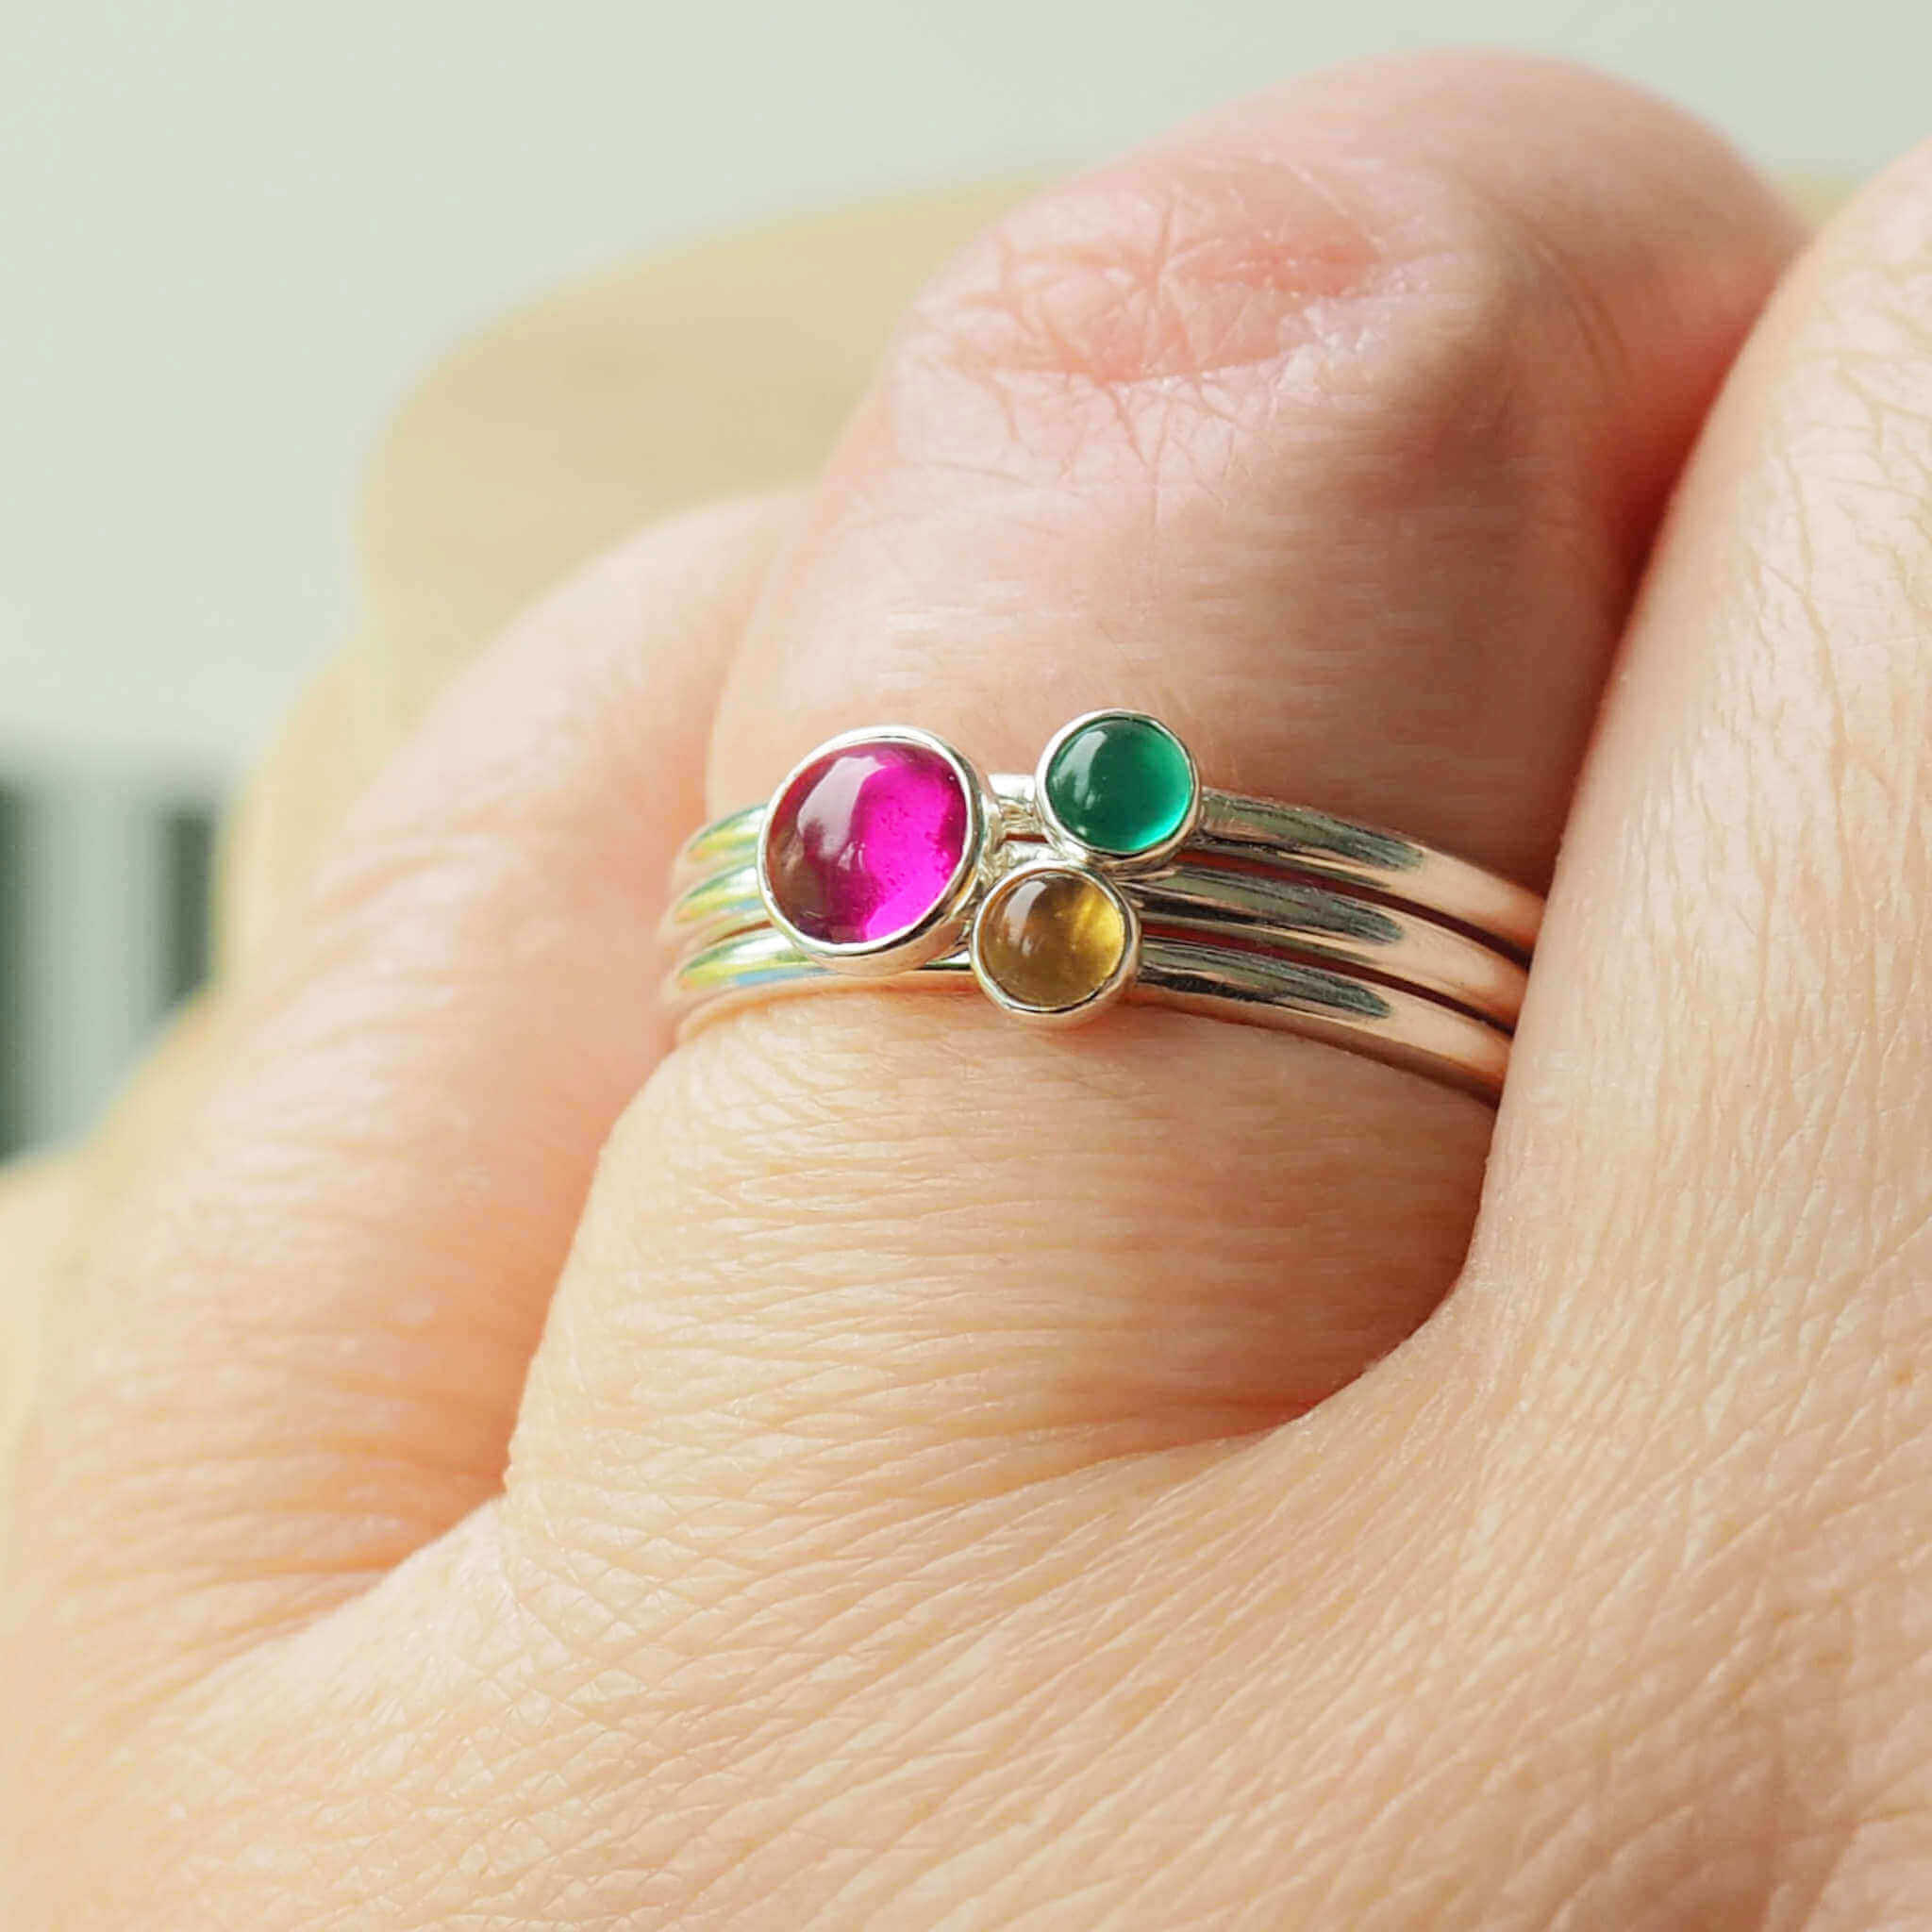 Three Birthstone Ring set made from Sterling Silver, each with a different birthstone in 5mm and 3mm size. This set has a large 5mm round Lab Ruby with a smaller 3mm Citrine and Green Agate. Birthstones for July, May and November. Handmade in Scotland by Maram Jewellery.